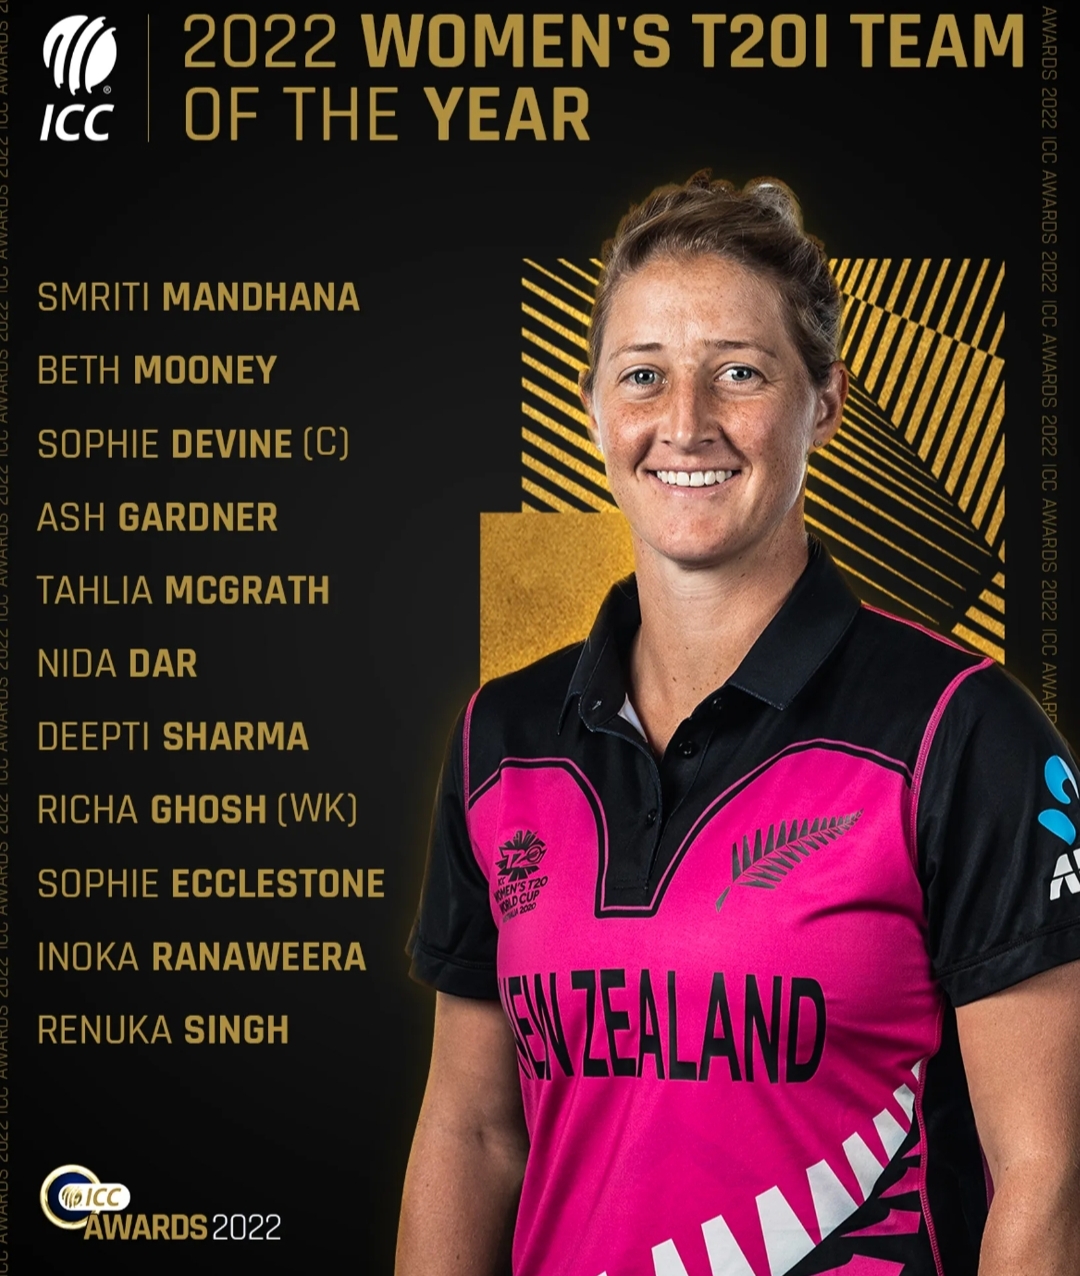 Women's T20I Team of the Year